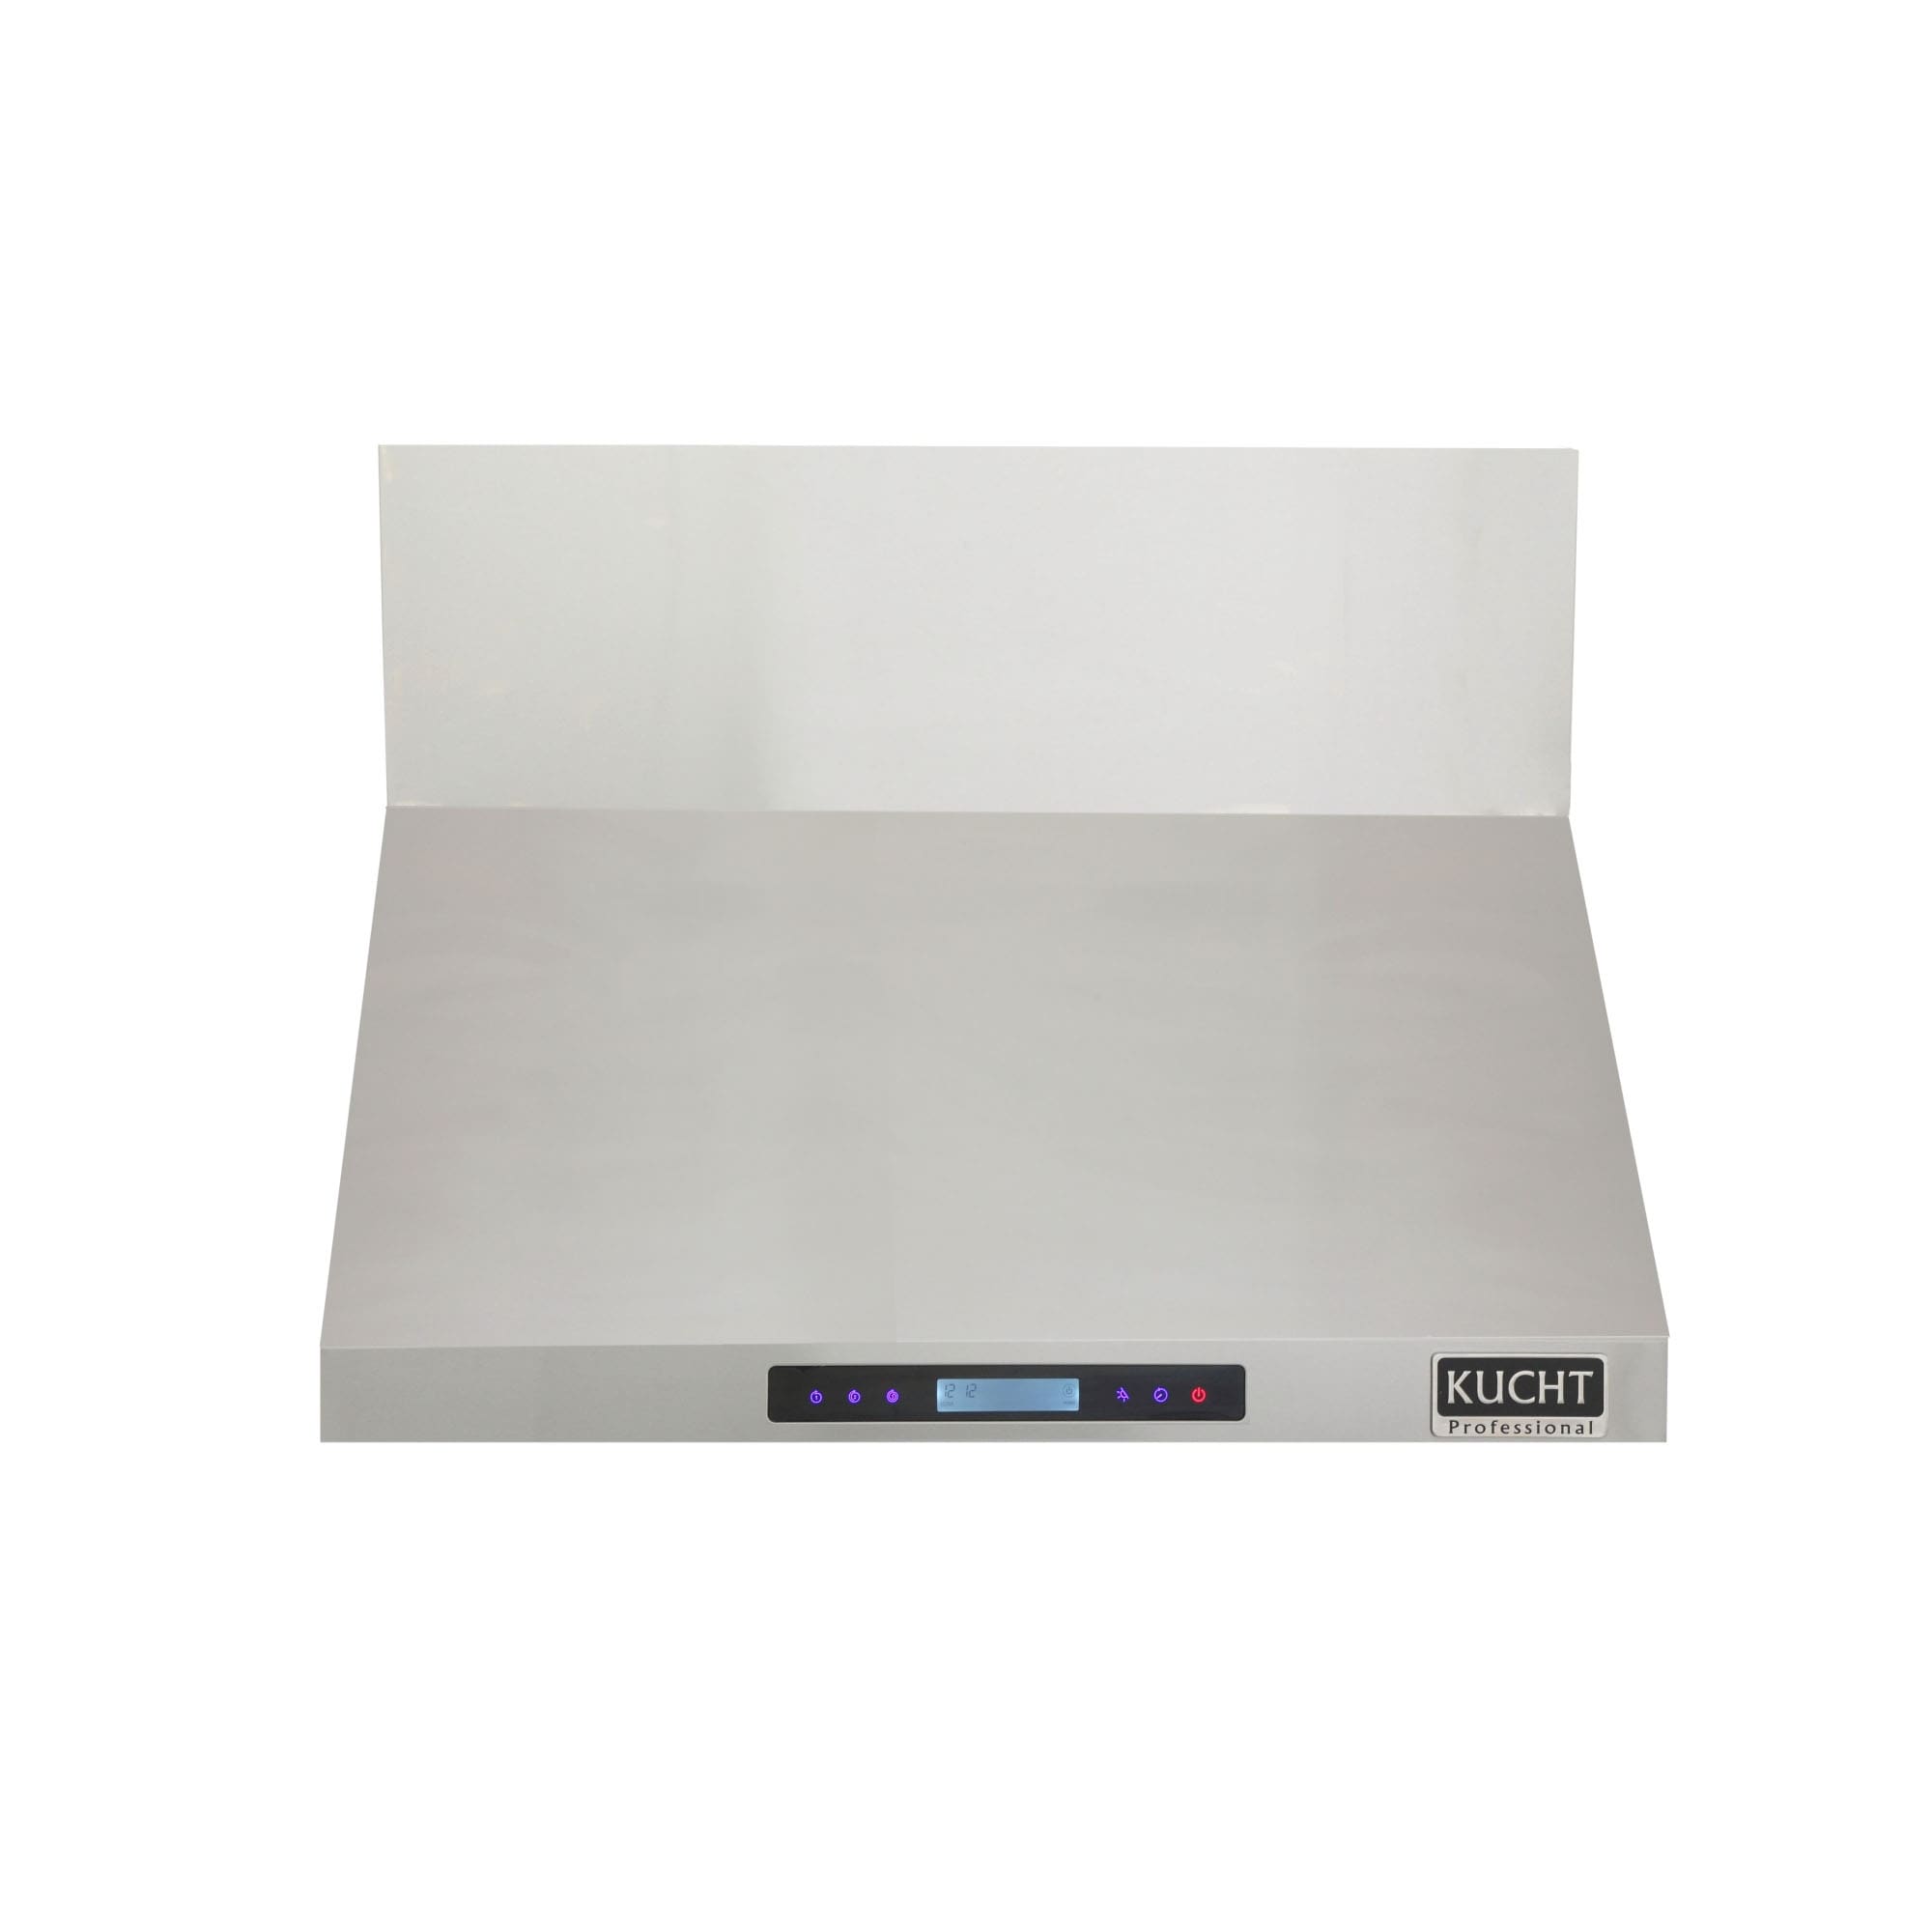 KUCHT Professional 30 in. Wall Mounted Range Hood 900CFM in Stainless Steel - Silver